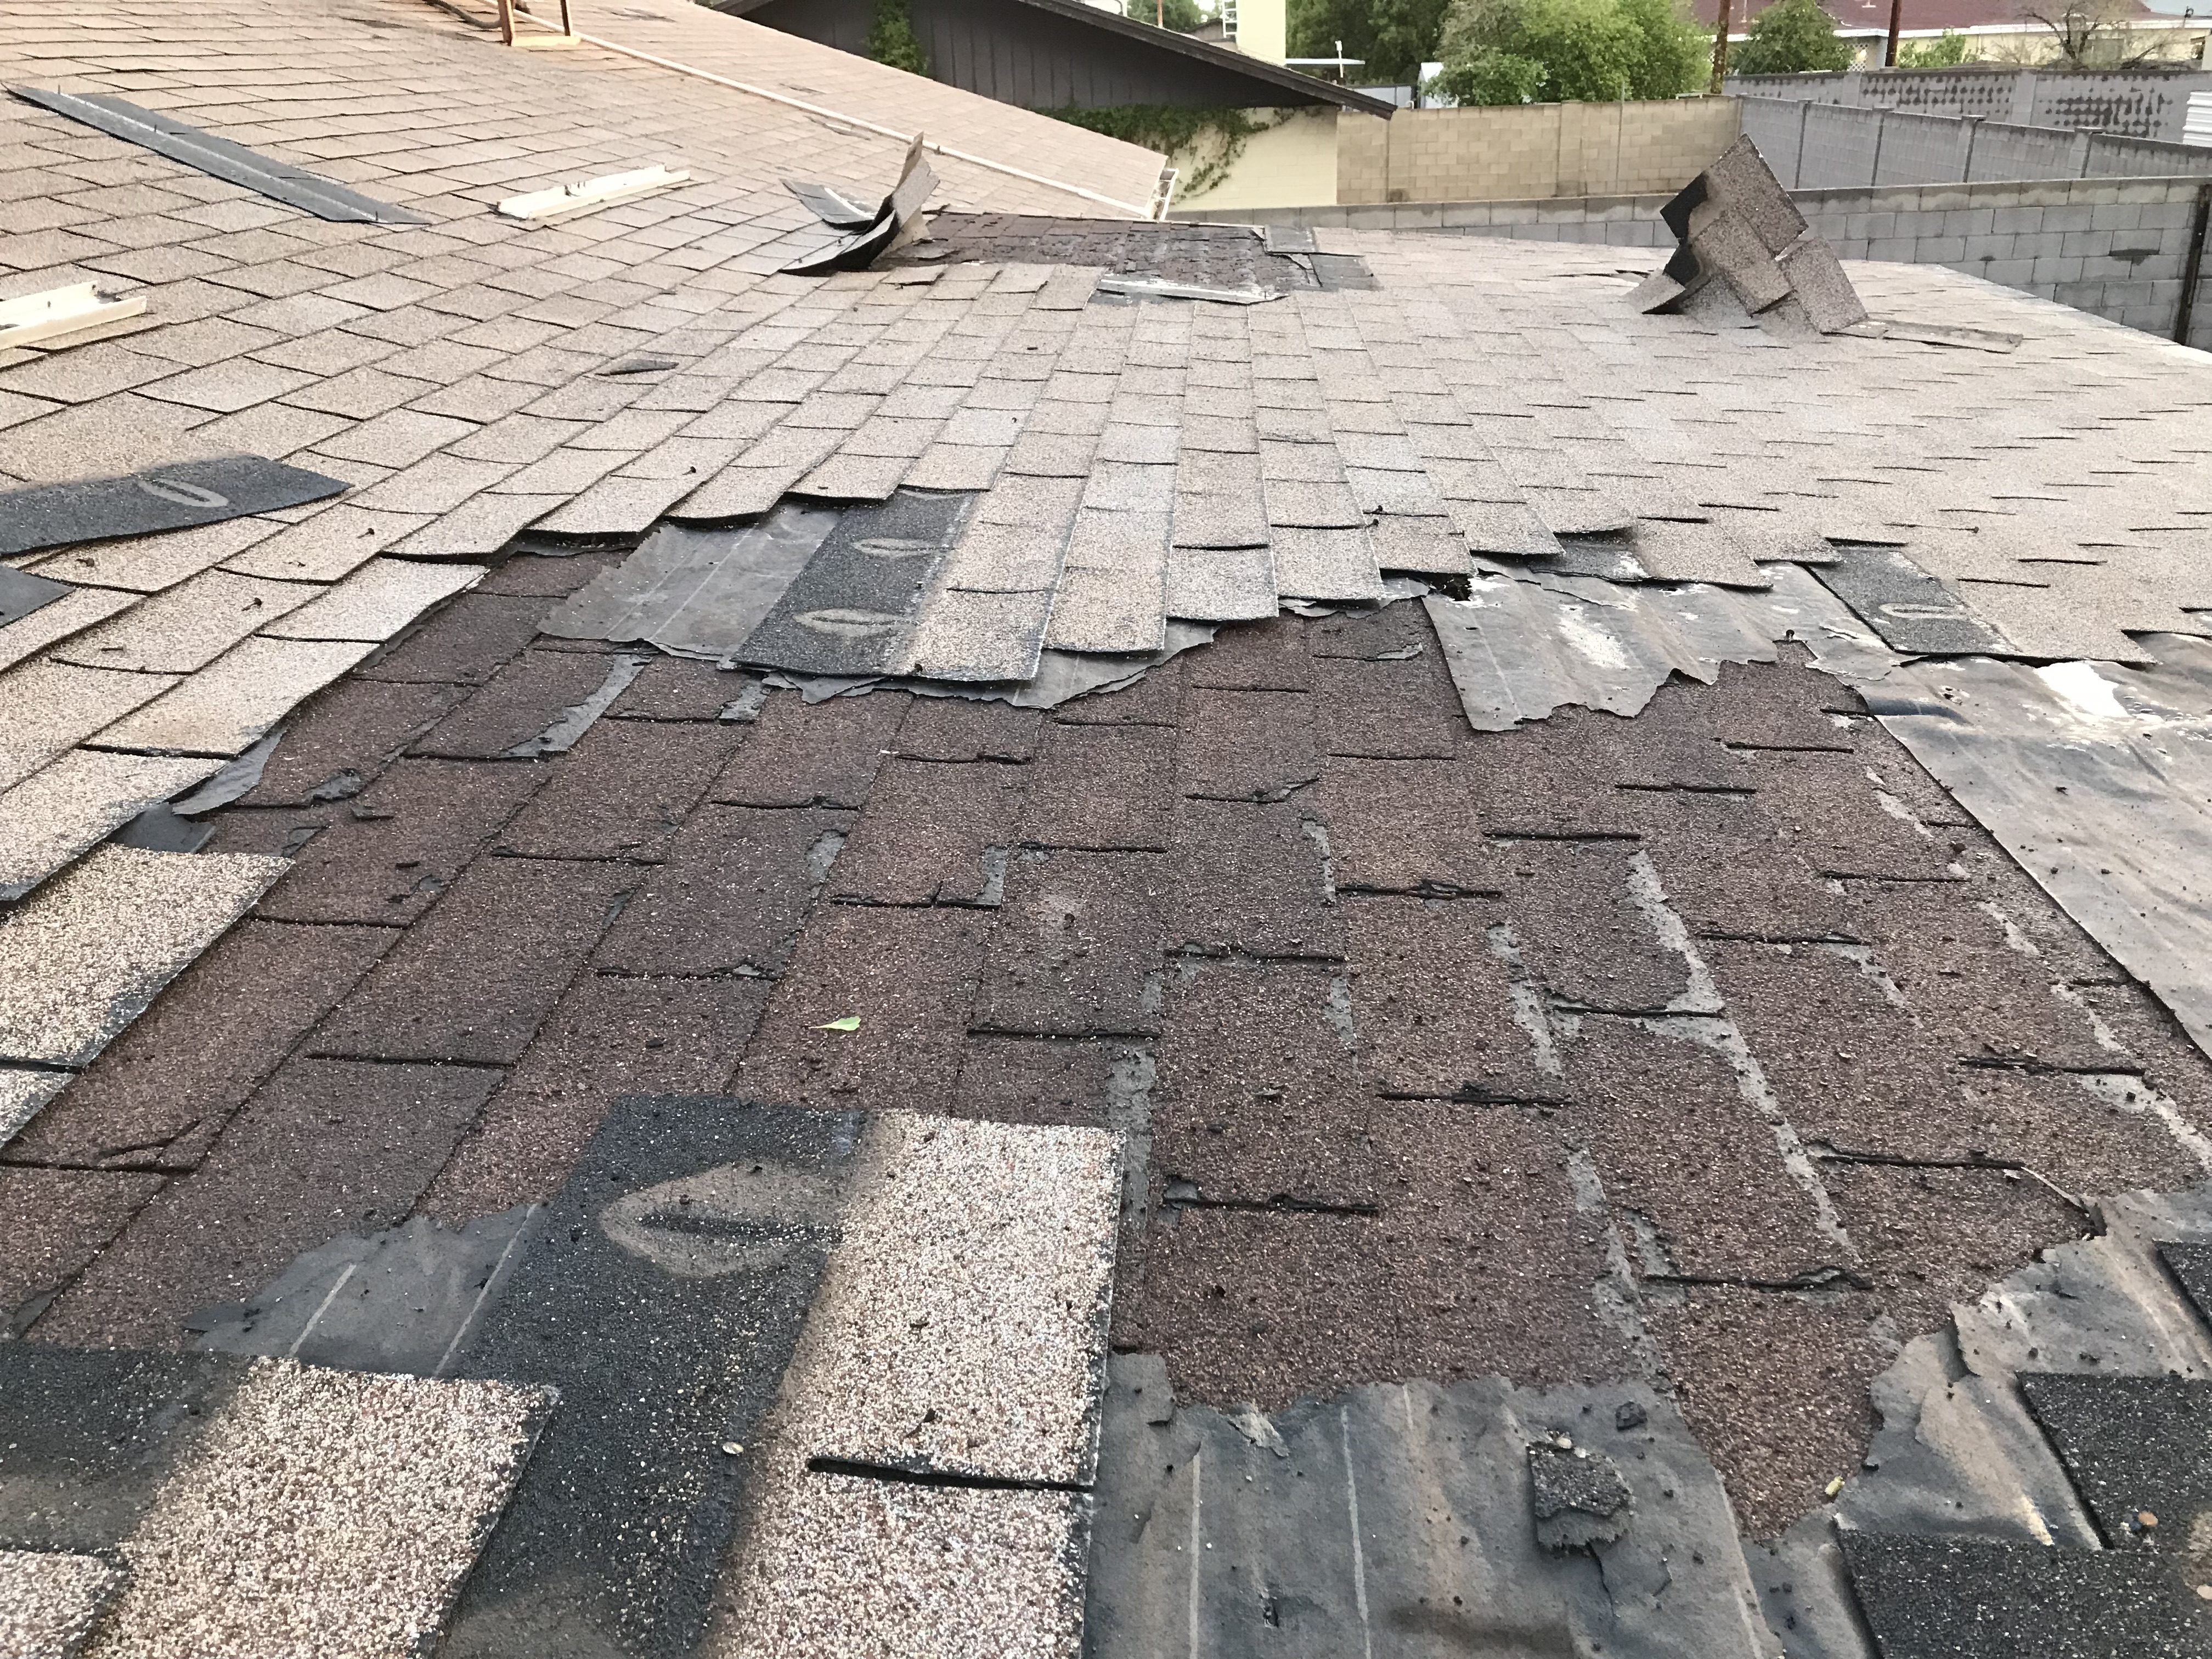 Shingles missing after Monsoon